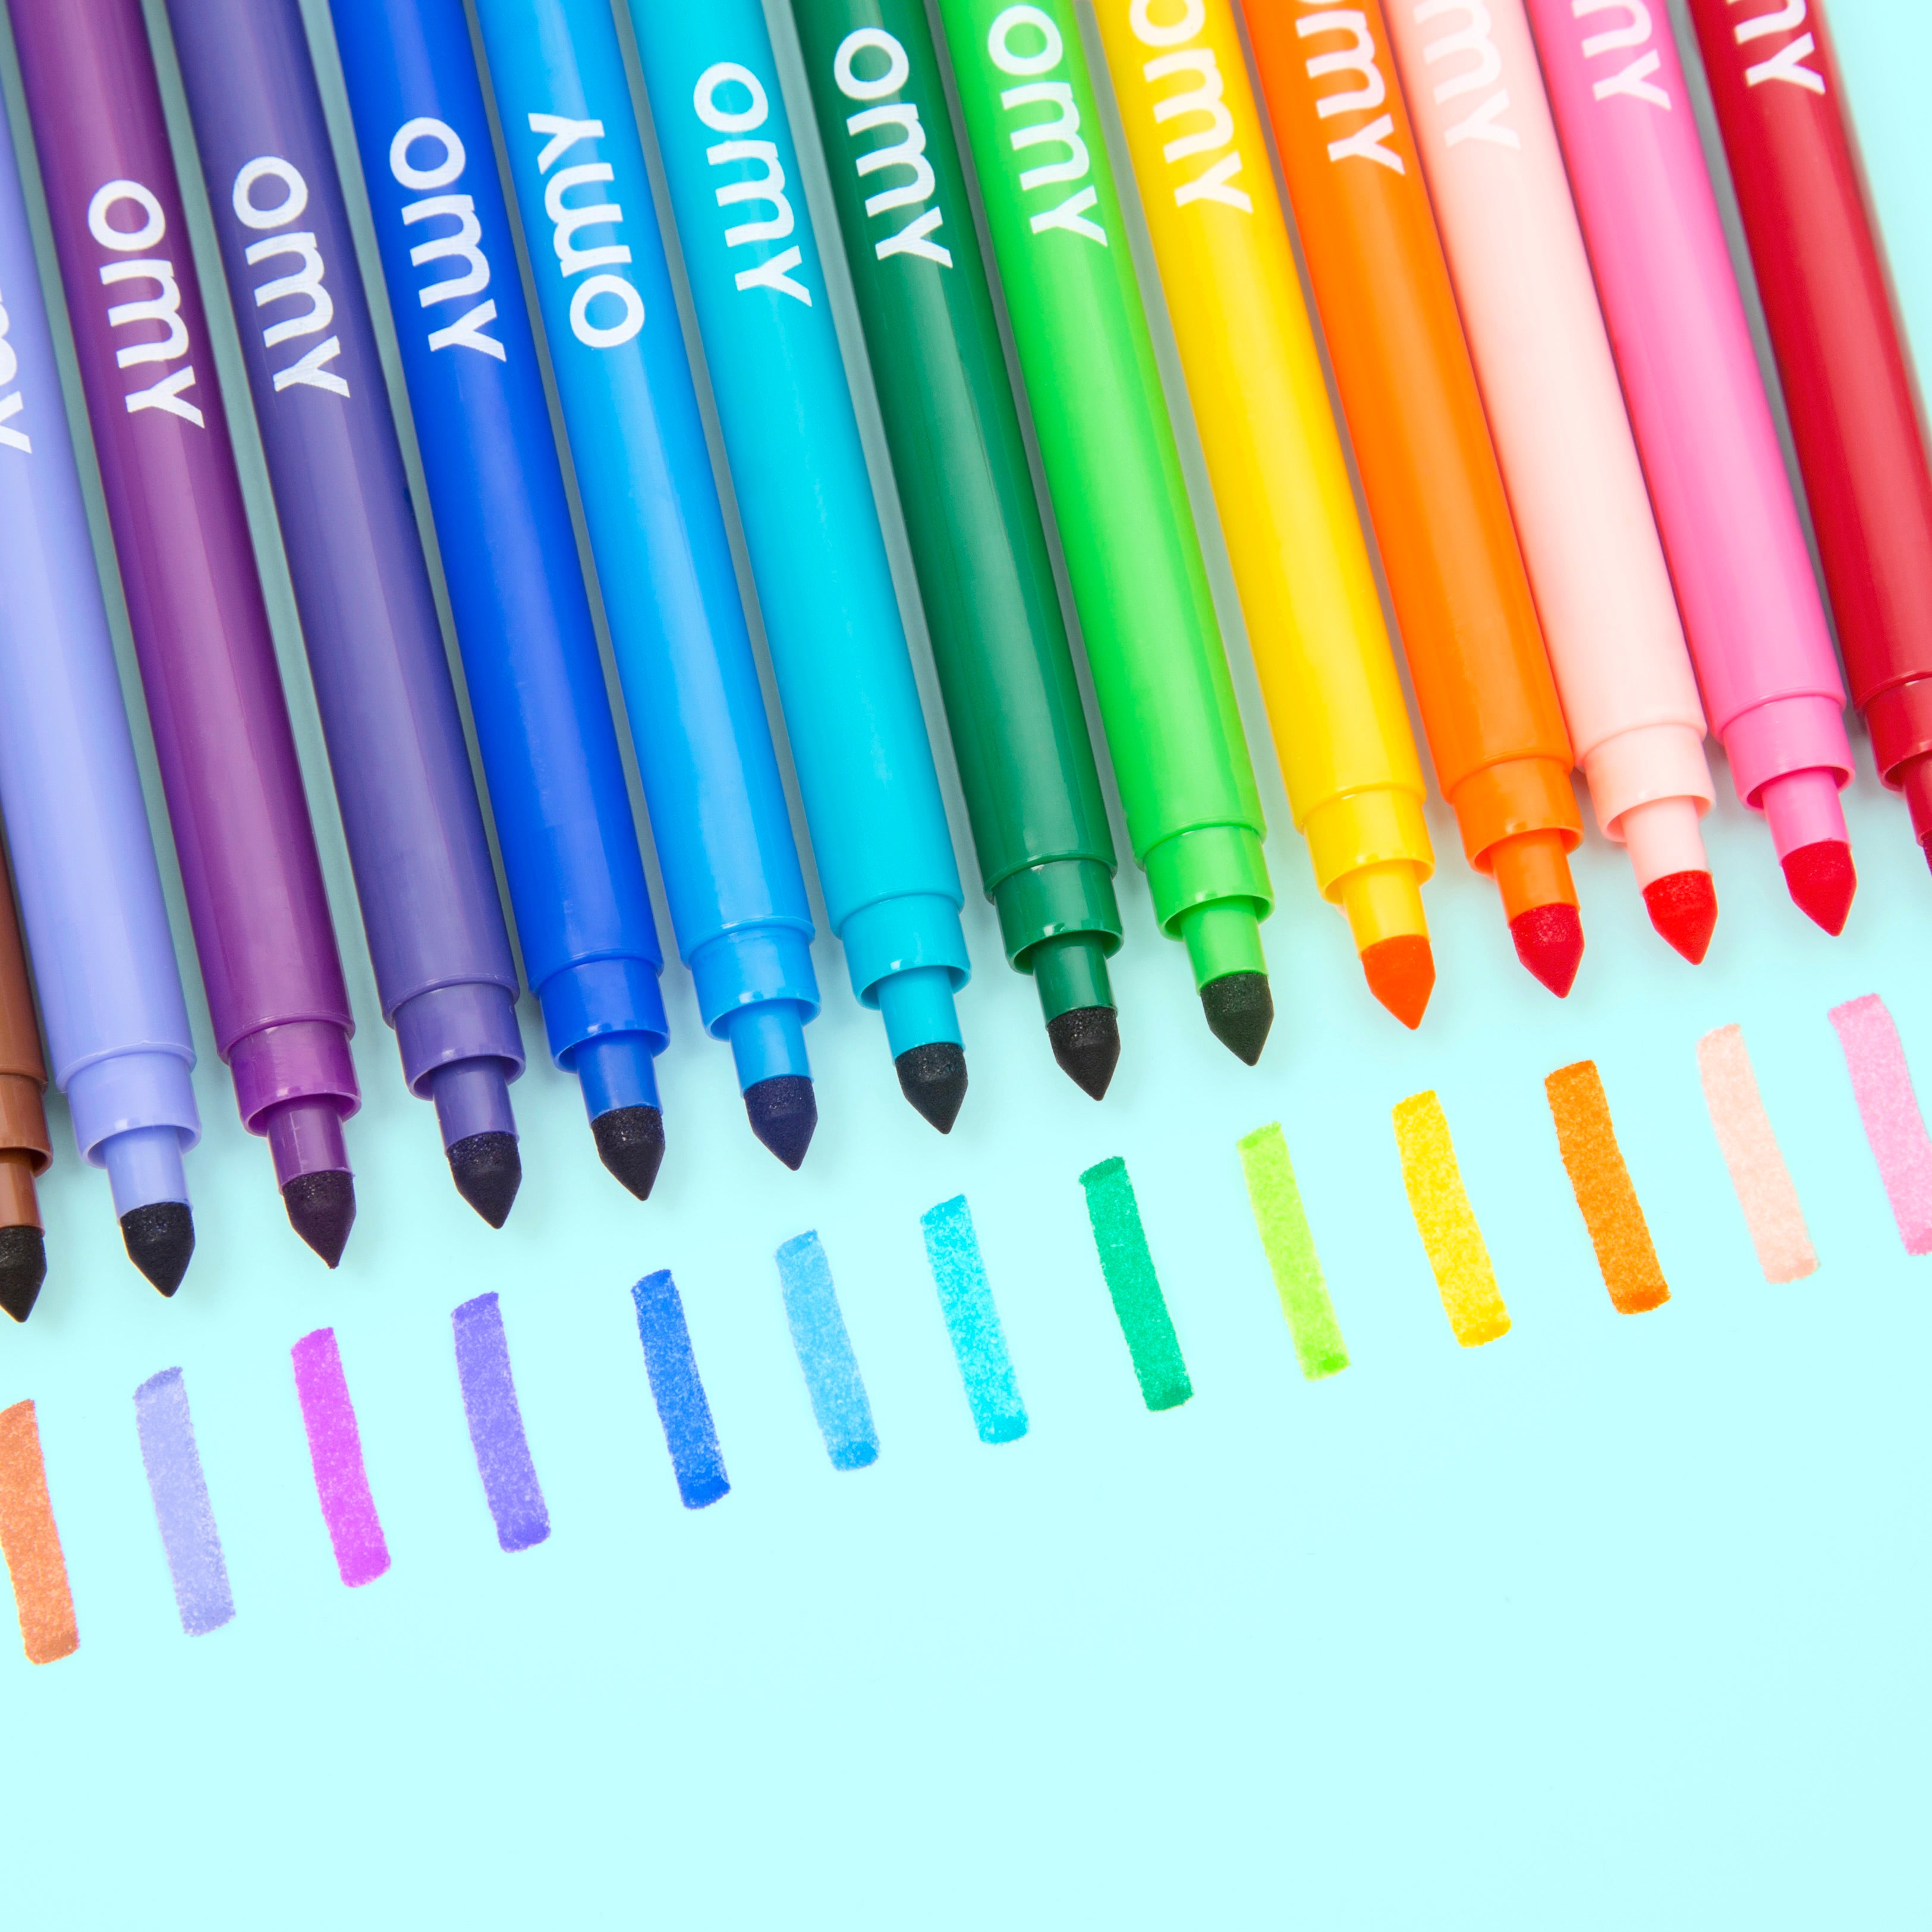 Ultra-washable markers - markers